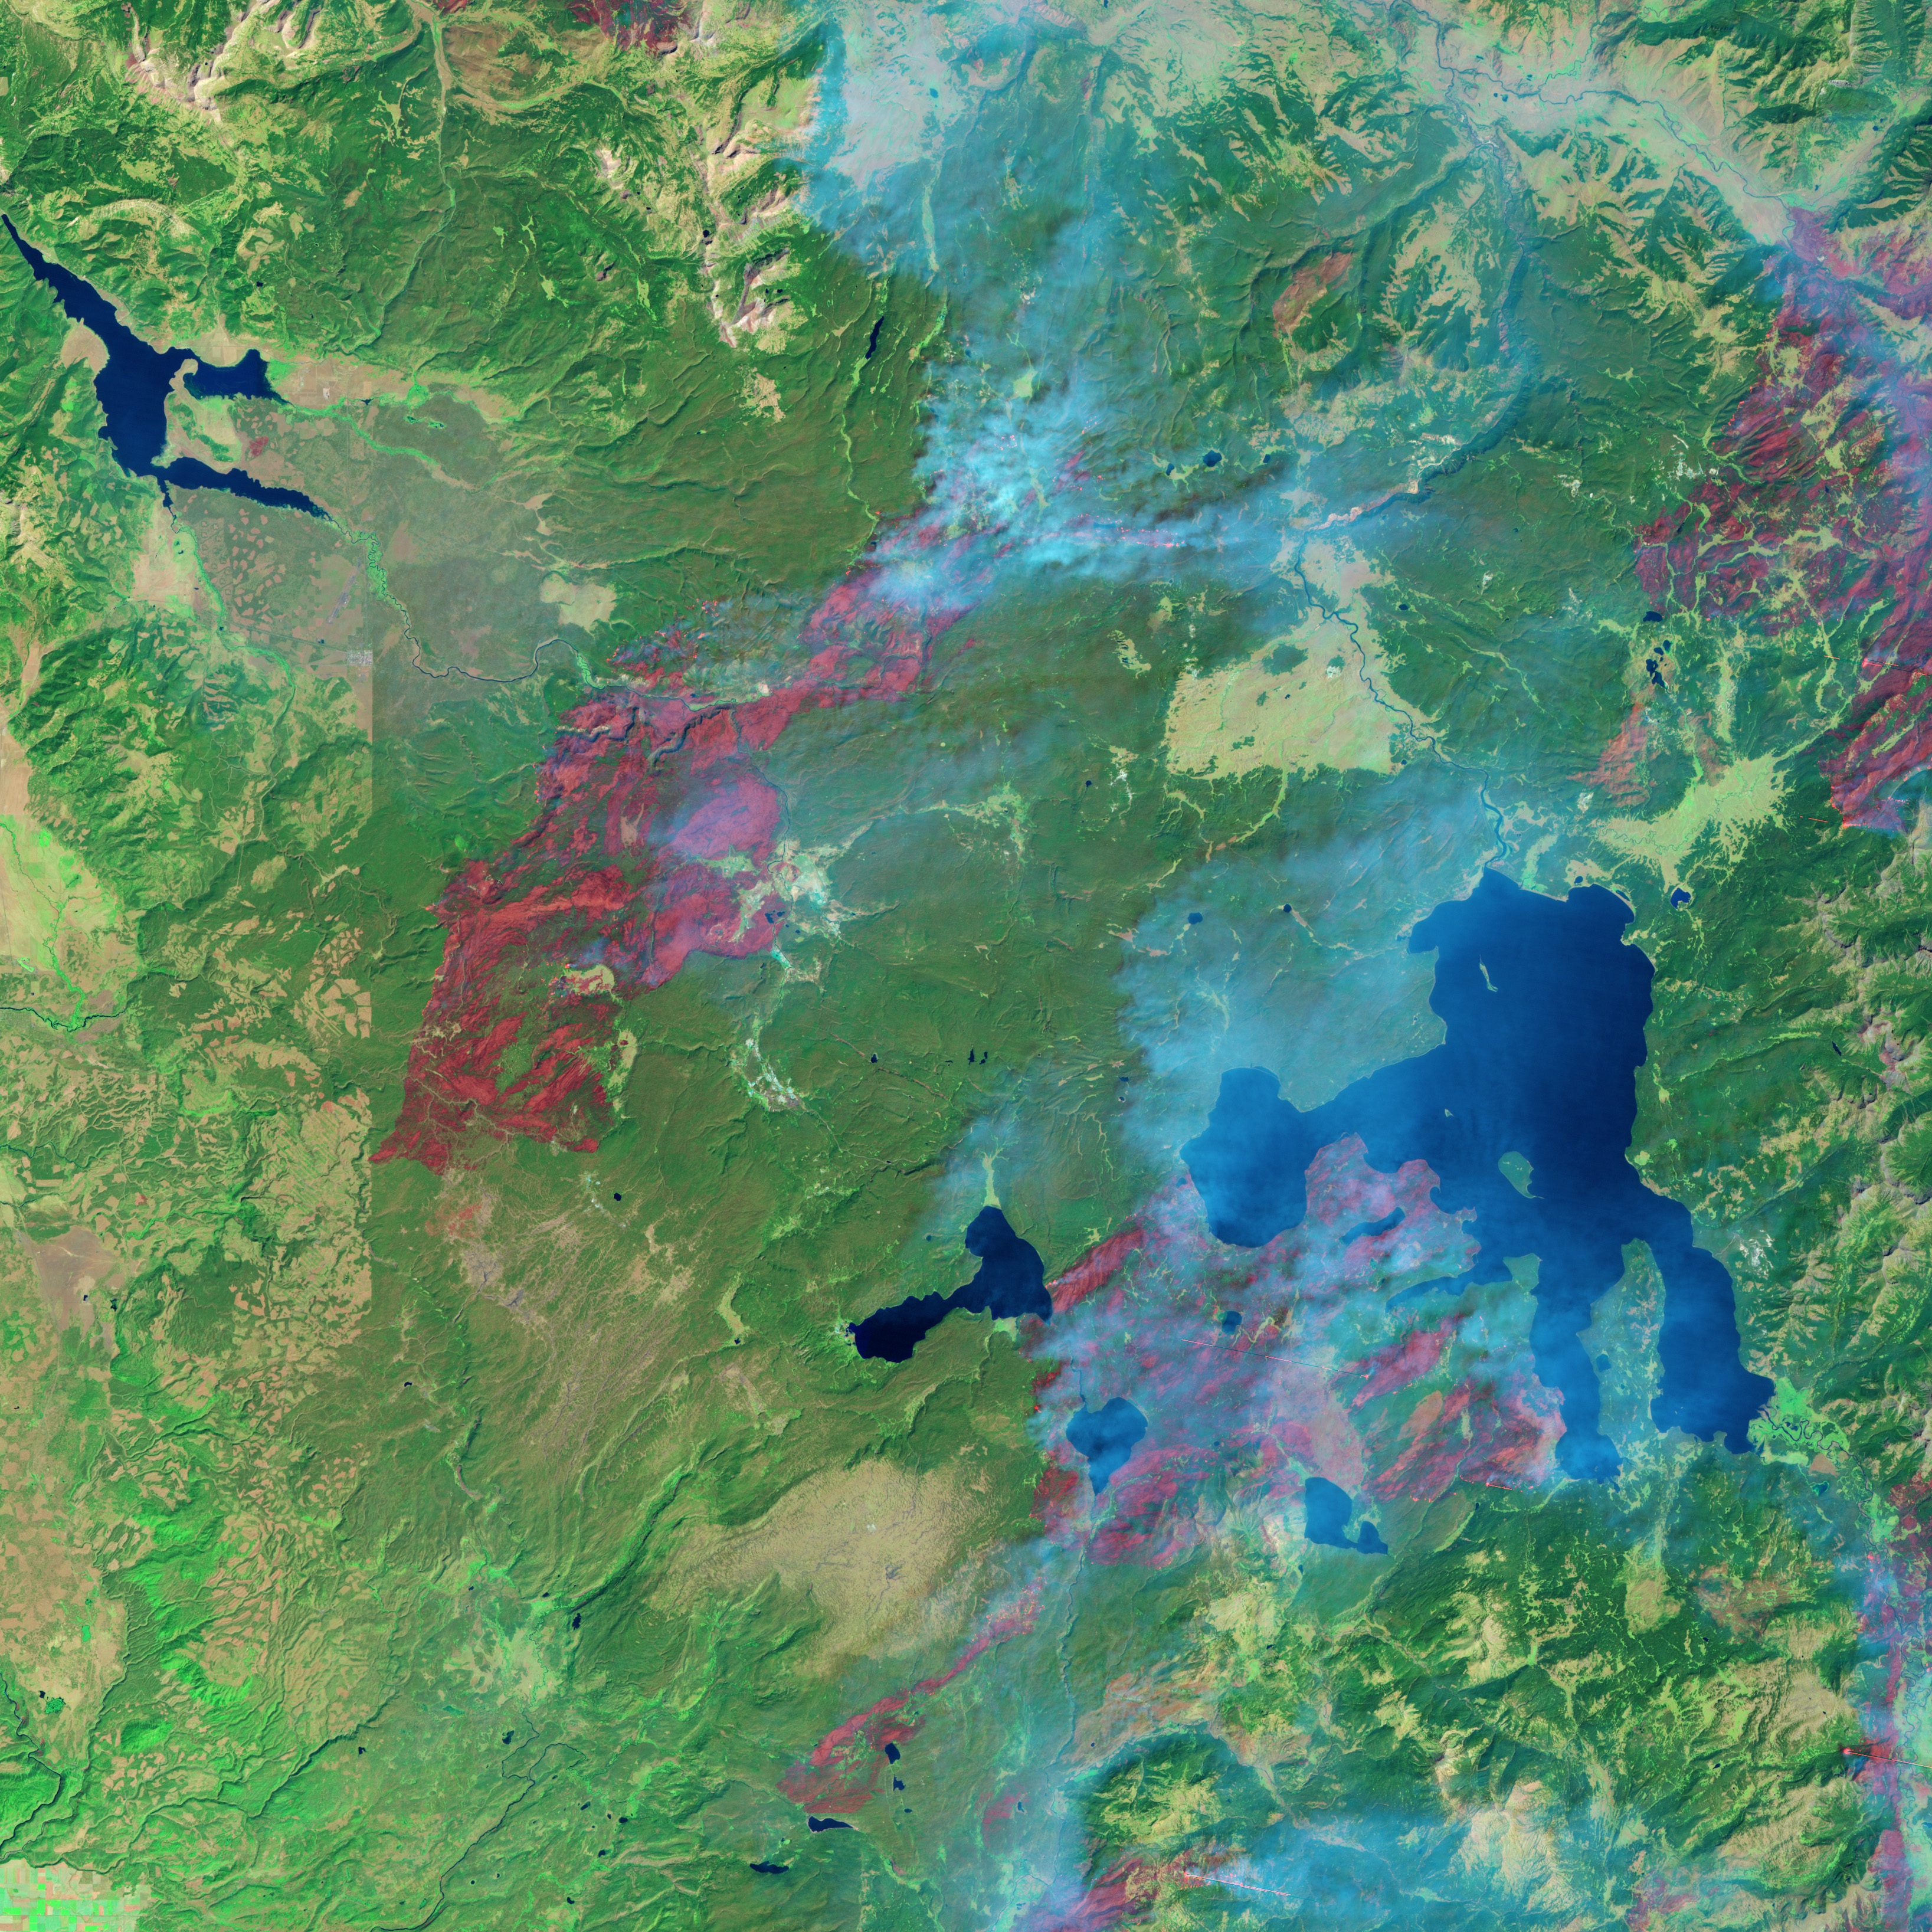 Yellowstone Recovers from 1988 Fires - related image preview